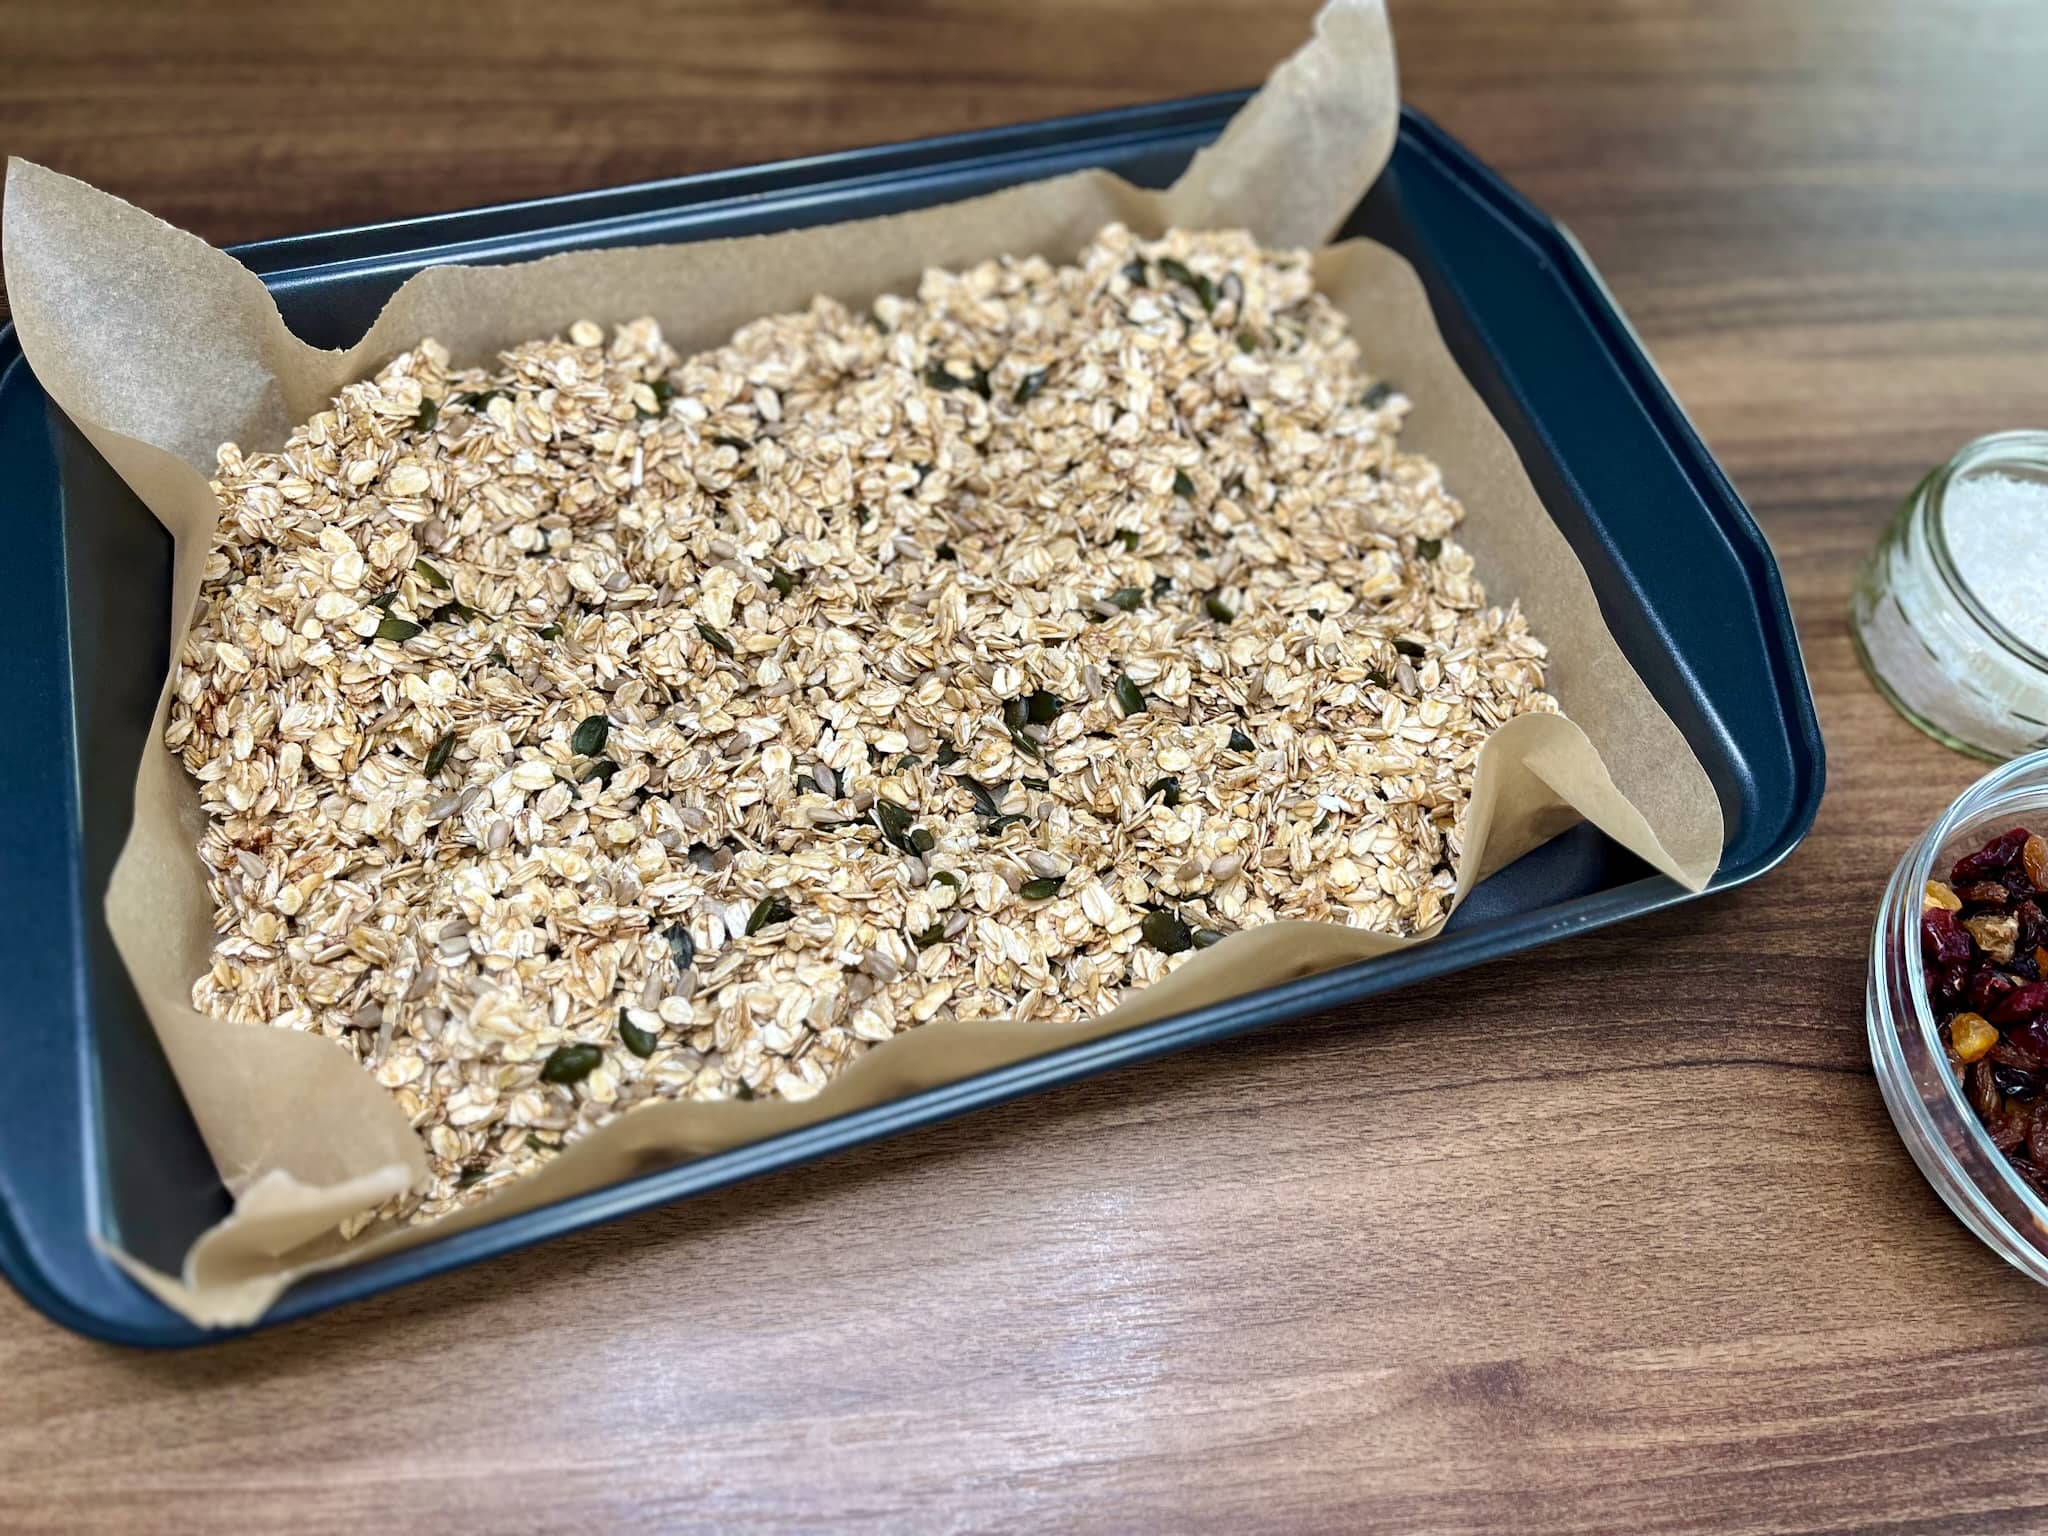 Oats-seeds mixture on a baking tray before baking in the oven